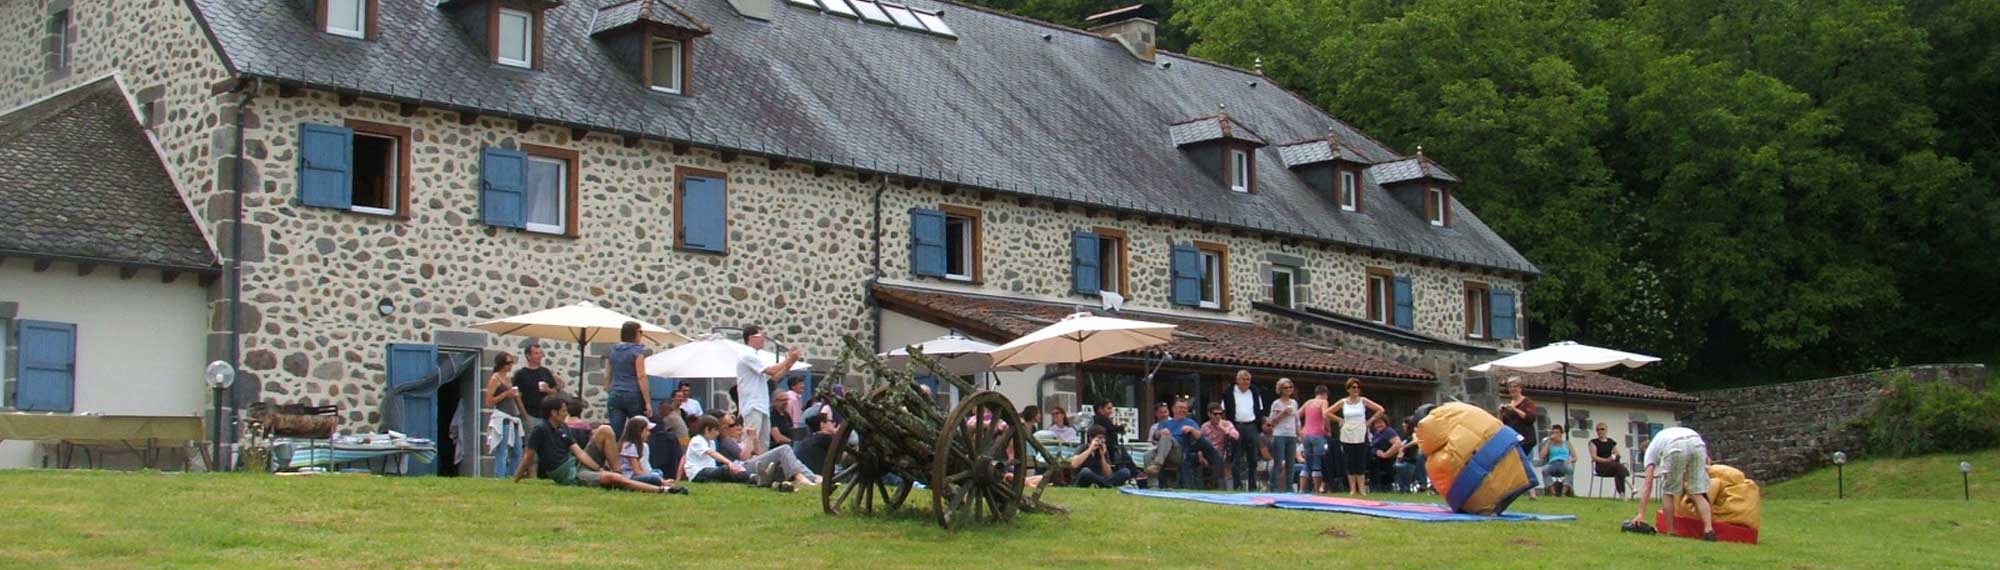 sejours groupe cantal salers